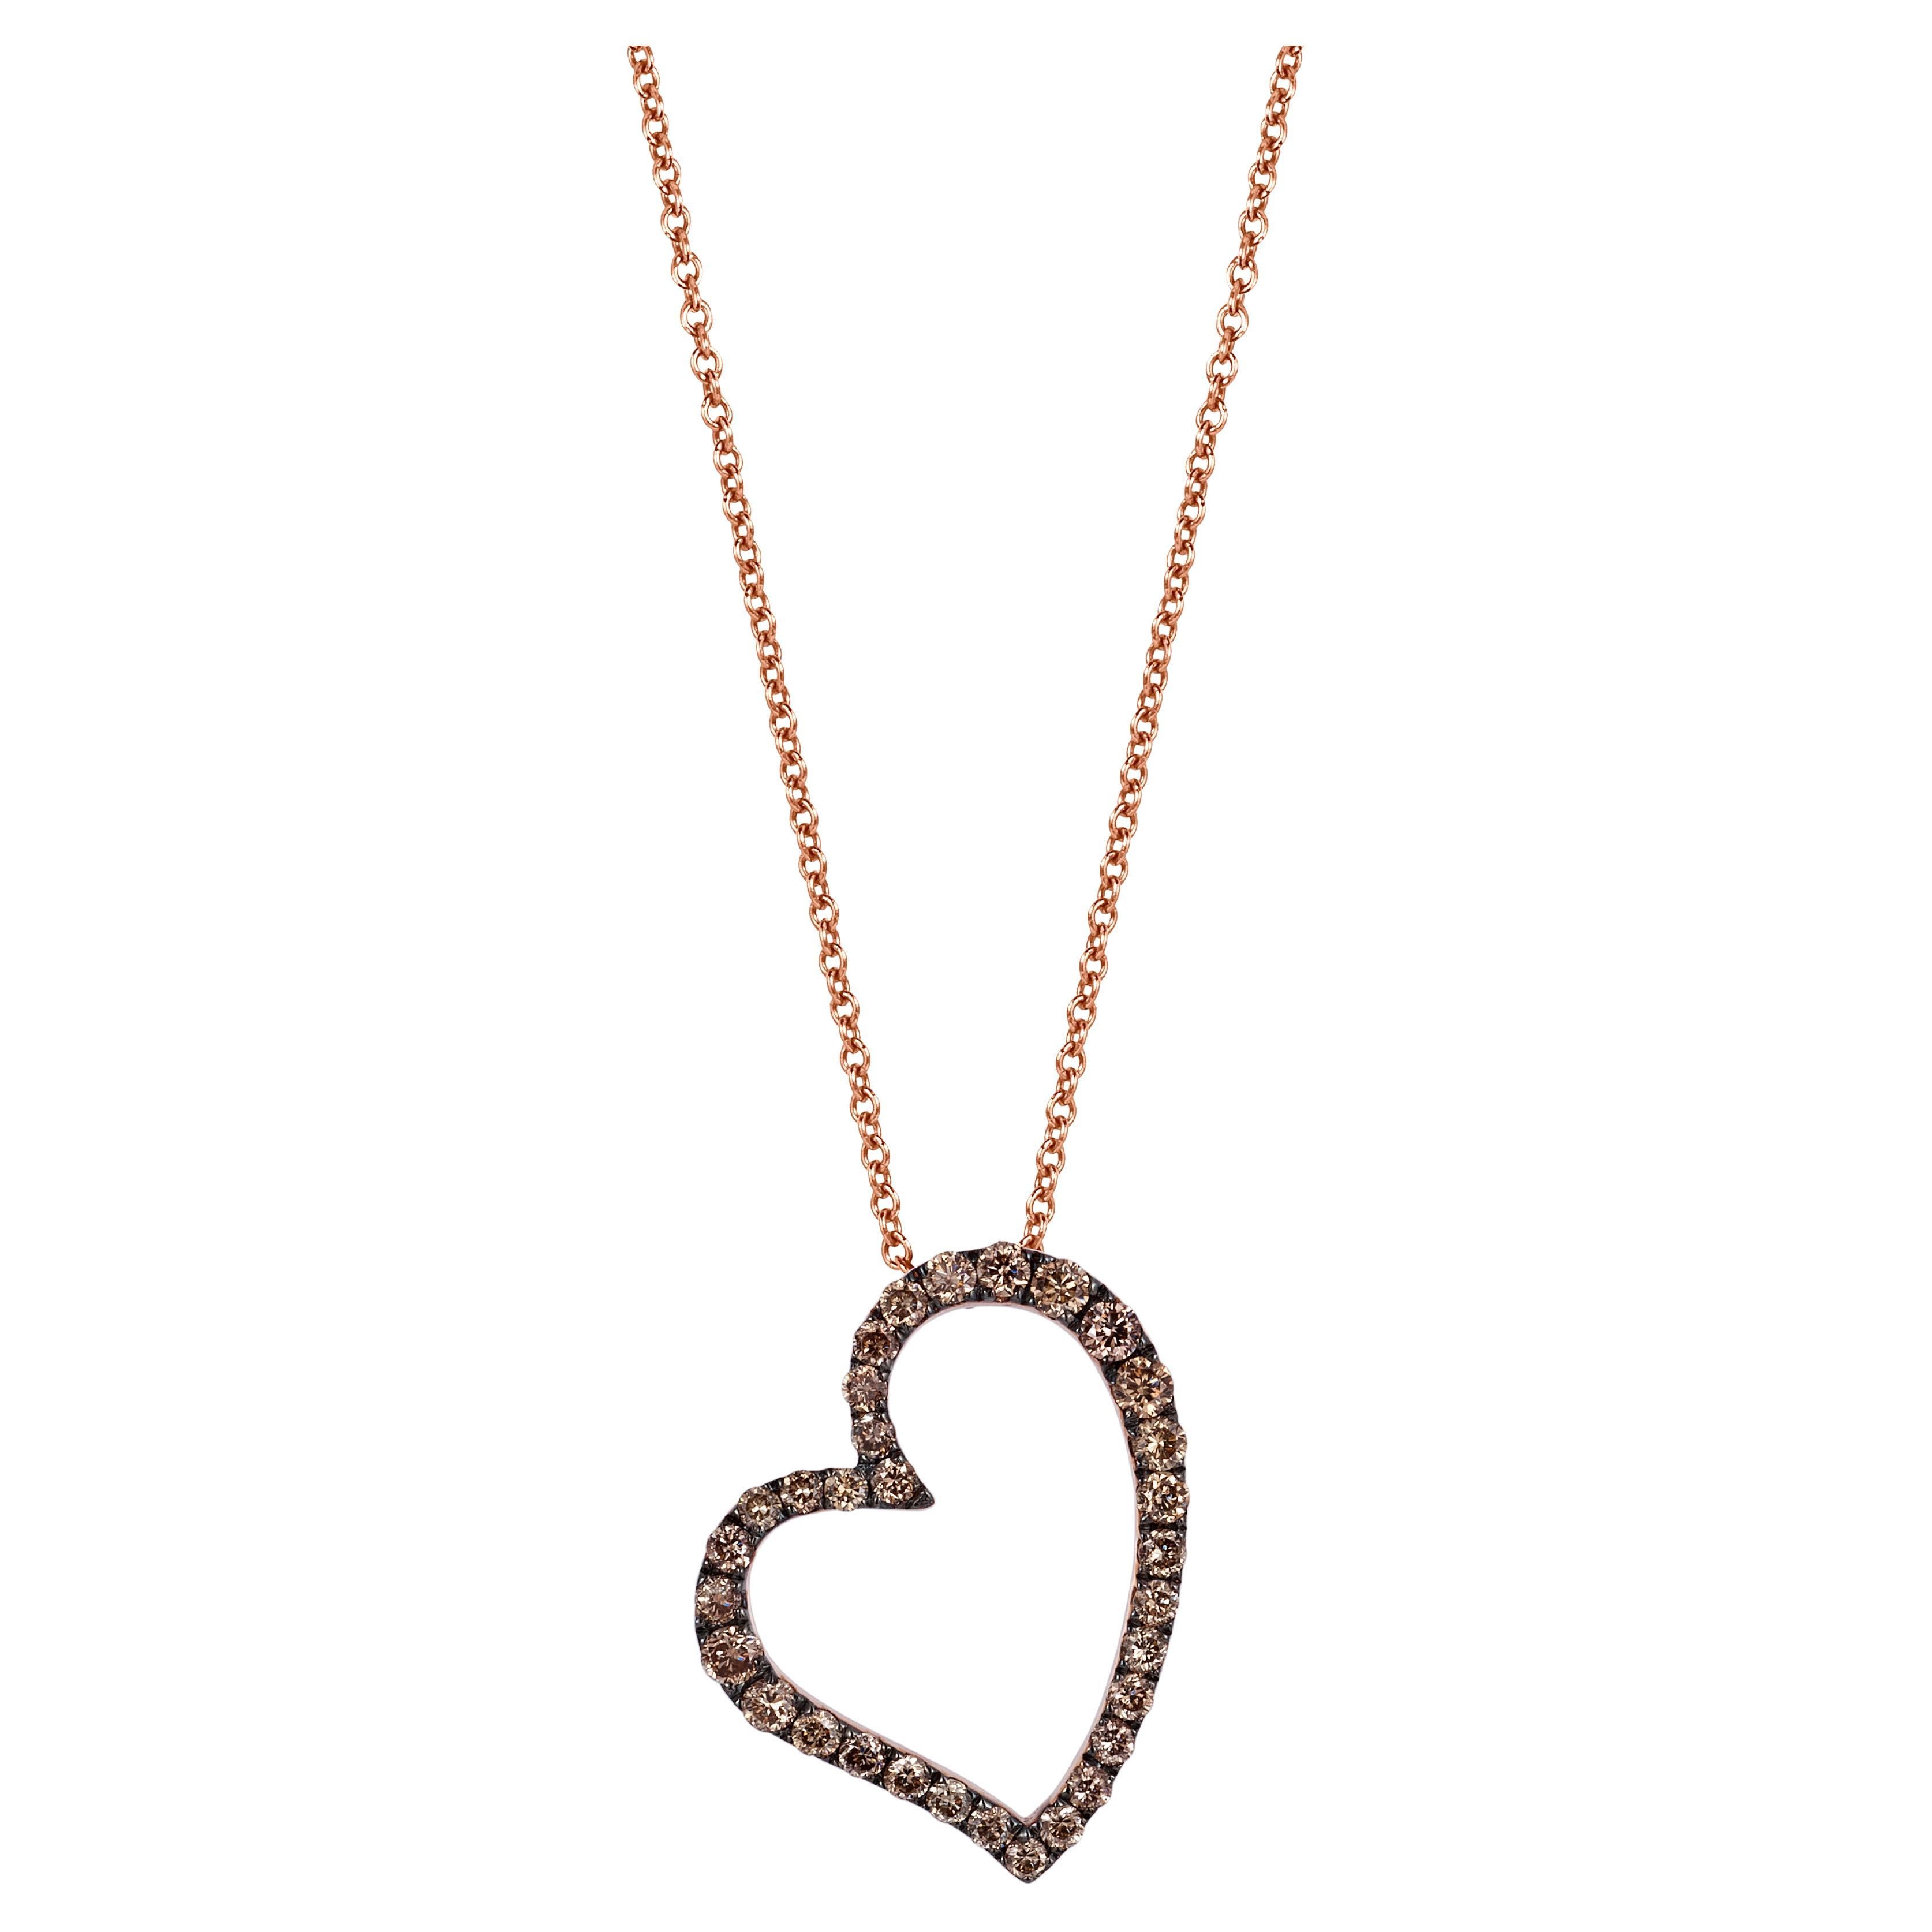 LE VIAN .33CTW DIAMOND HEART PENDANT/CHAIN CONTAINING: 16 ROUND DIAMONDS  AND 3 ROUND CHOCOLATE DIAMONDS; 14KY CHAIN INCLUDED - 3JREQFMY